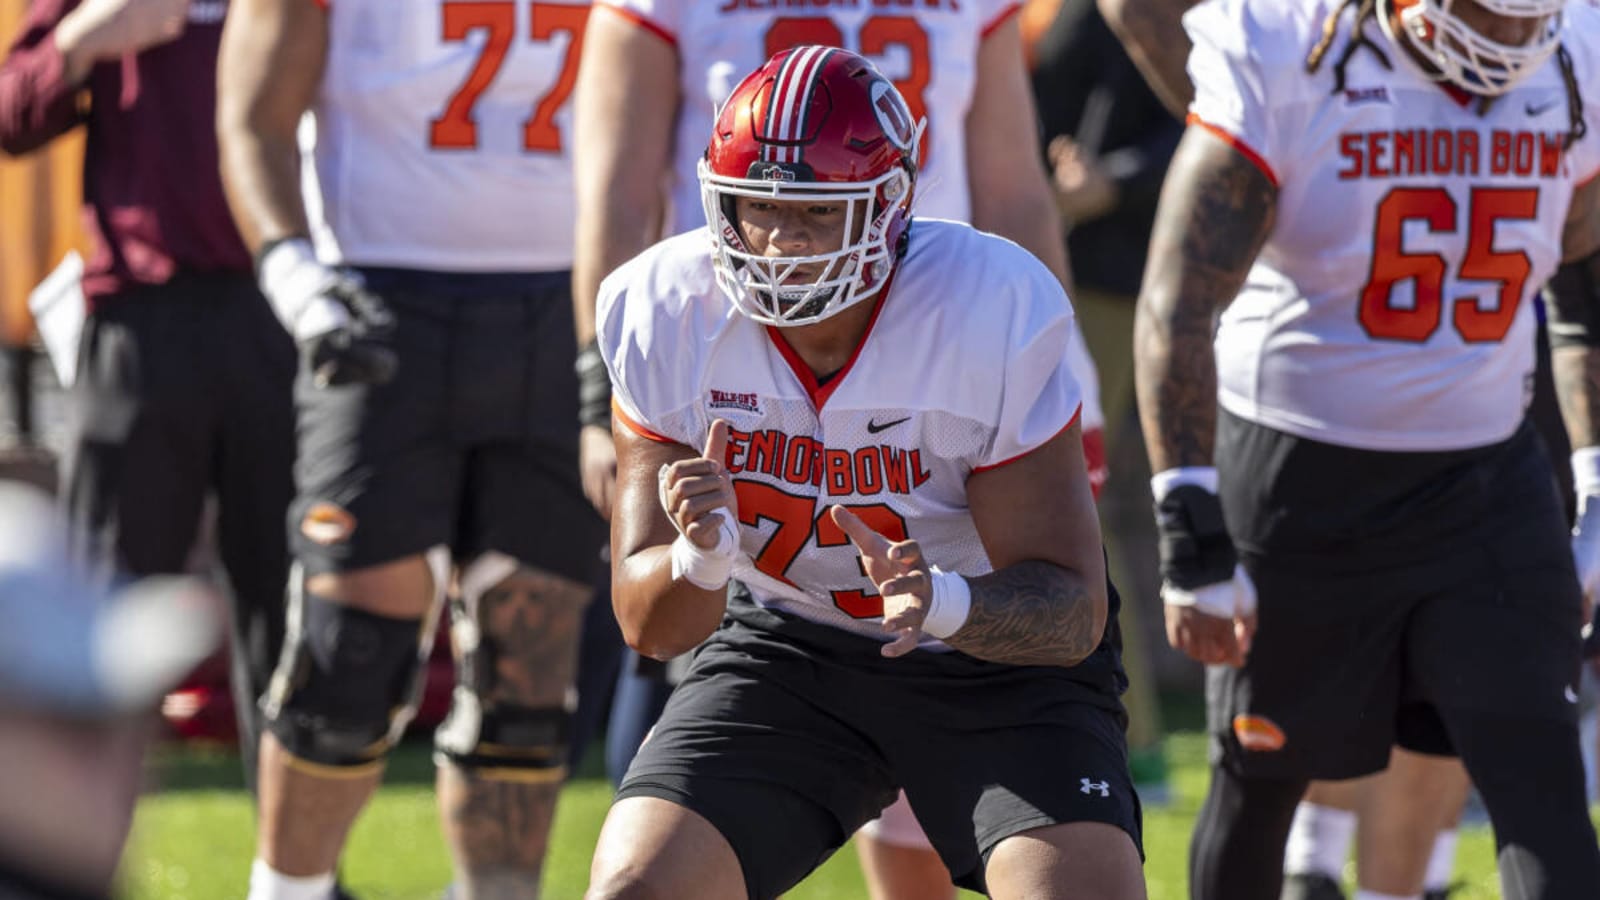 4 standouts for the Lions from day two of Senior Bowl practices